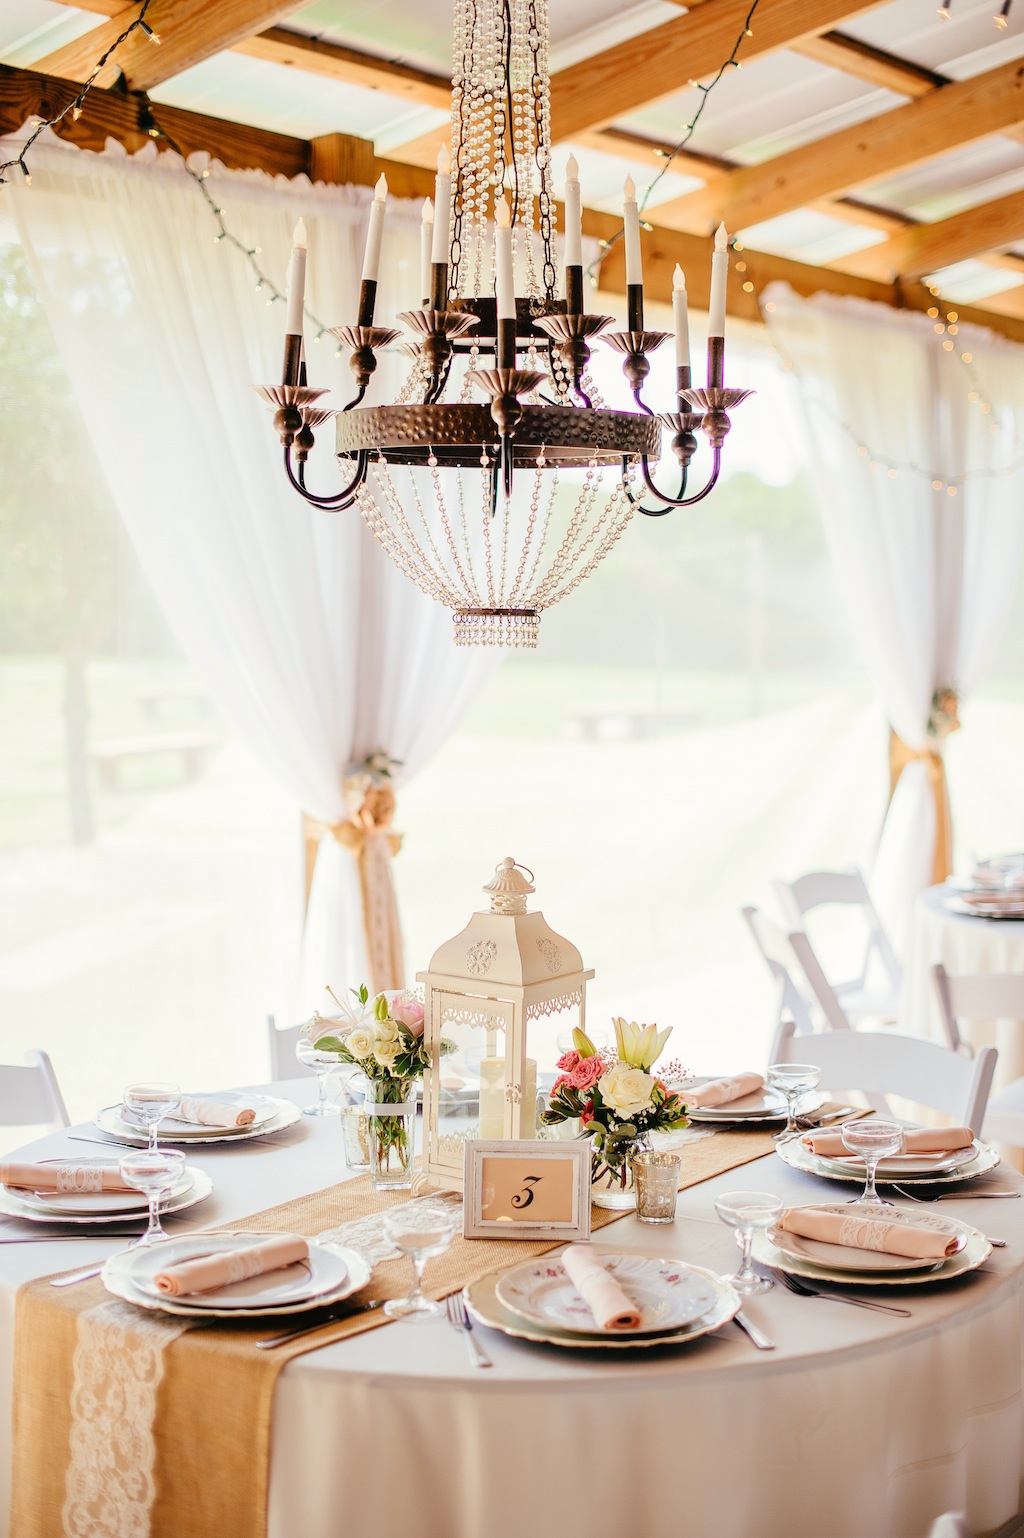 Cross Creek Ranch Wedding near Tampa Bay, Fl - Rustic Rose, Burlap and Lace by Lakeland Wedding Photographer Sunglow Photography (25)